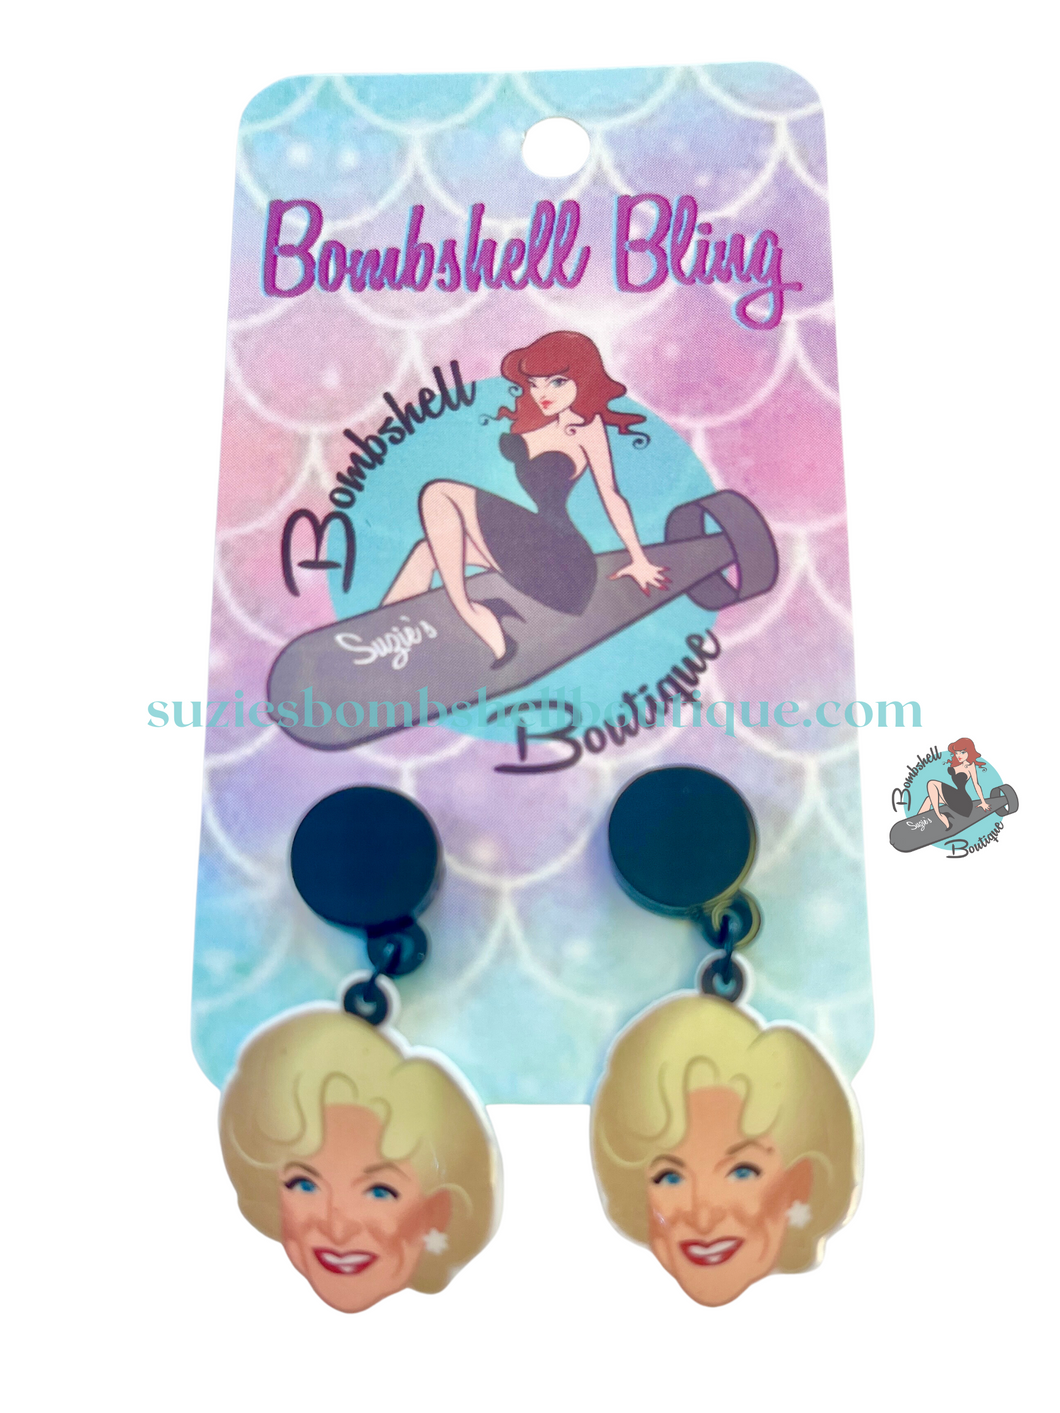 Bombshell Bling Rose Earrings Golden Girls resin costume jewellery nostalgia novelty altfashion pinup Canadian Pin-Up Shop Suzie's Bombshell Boutique